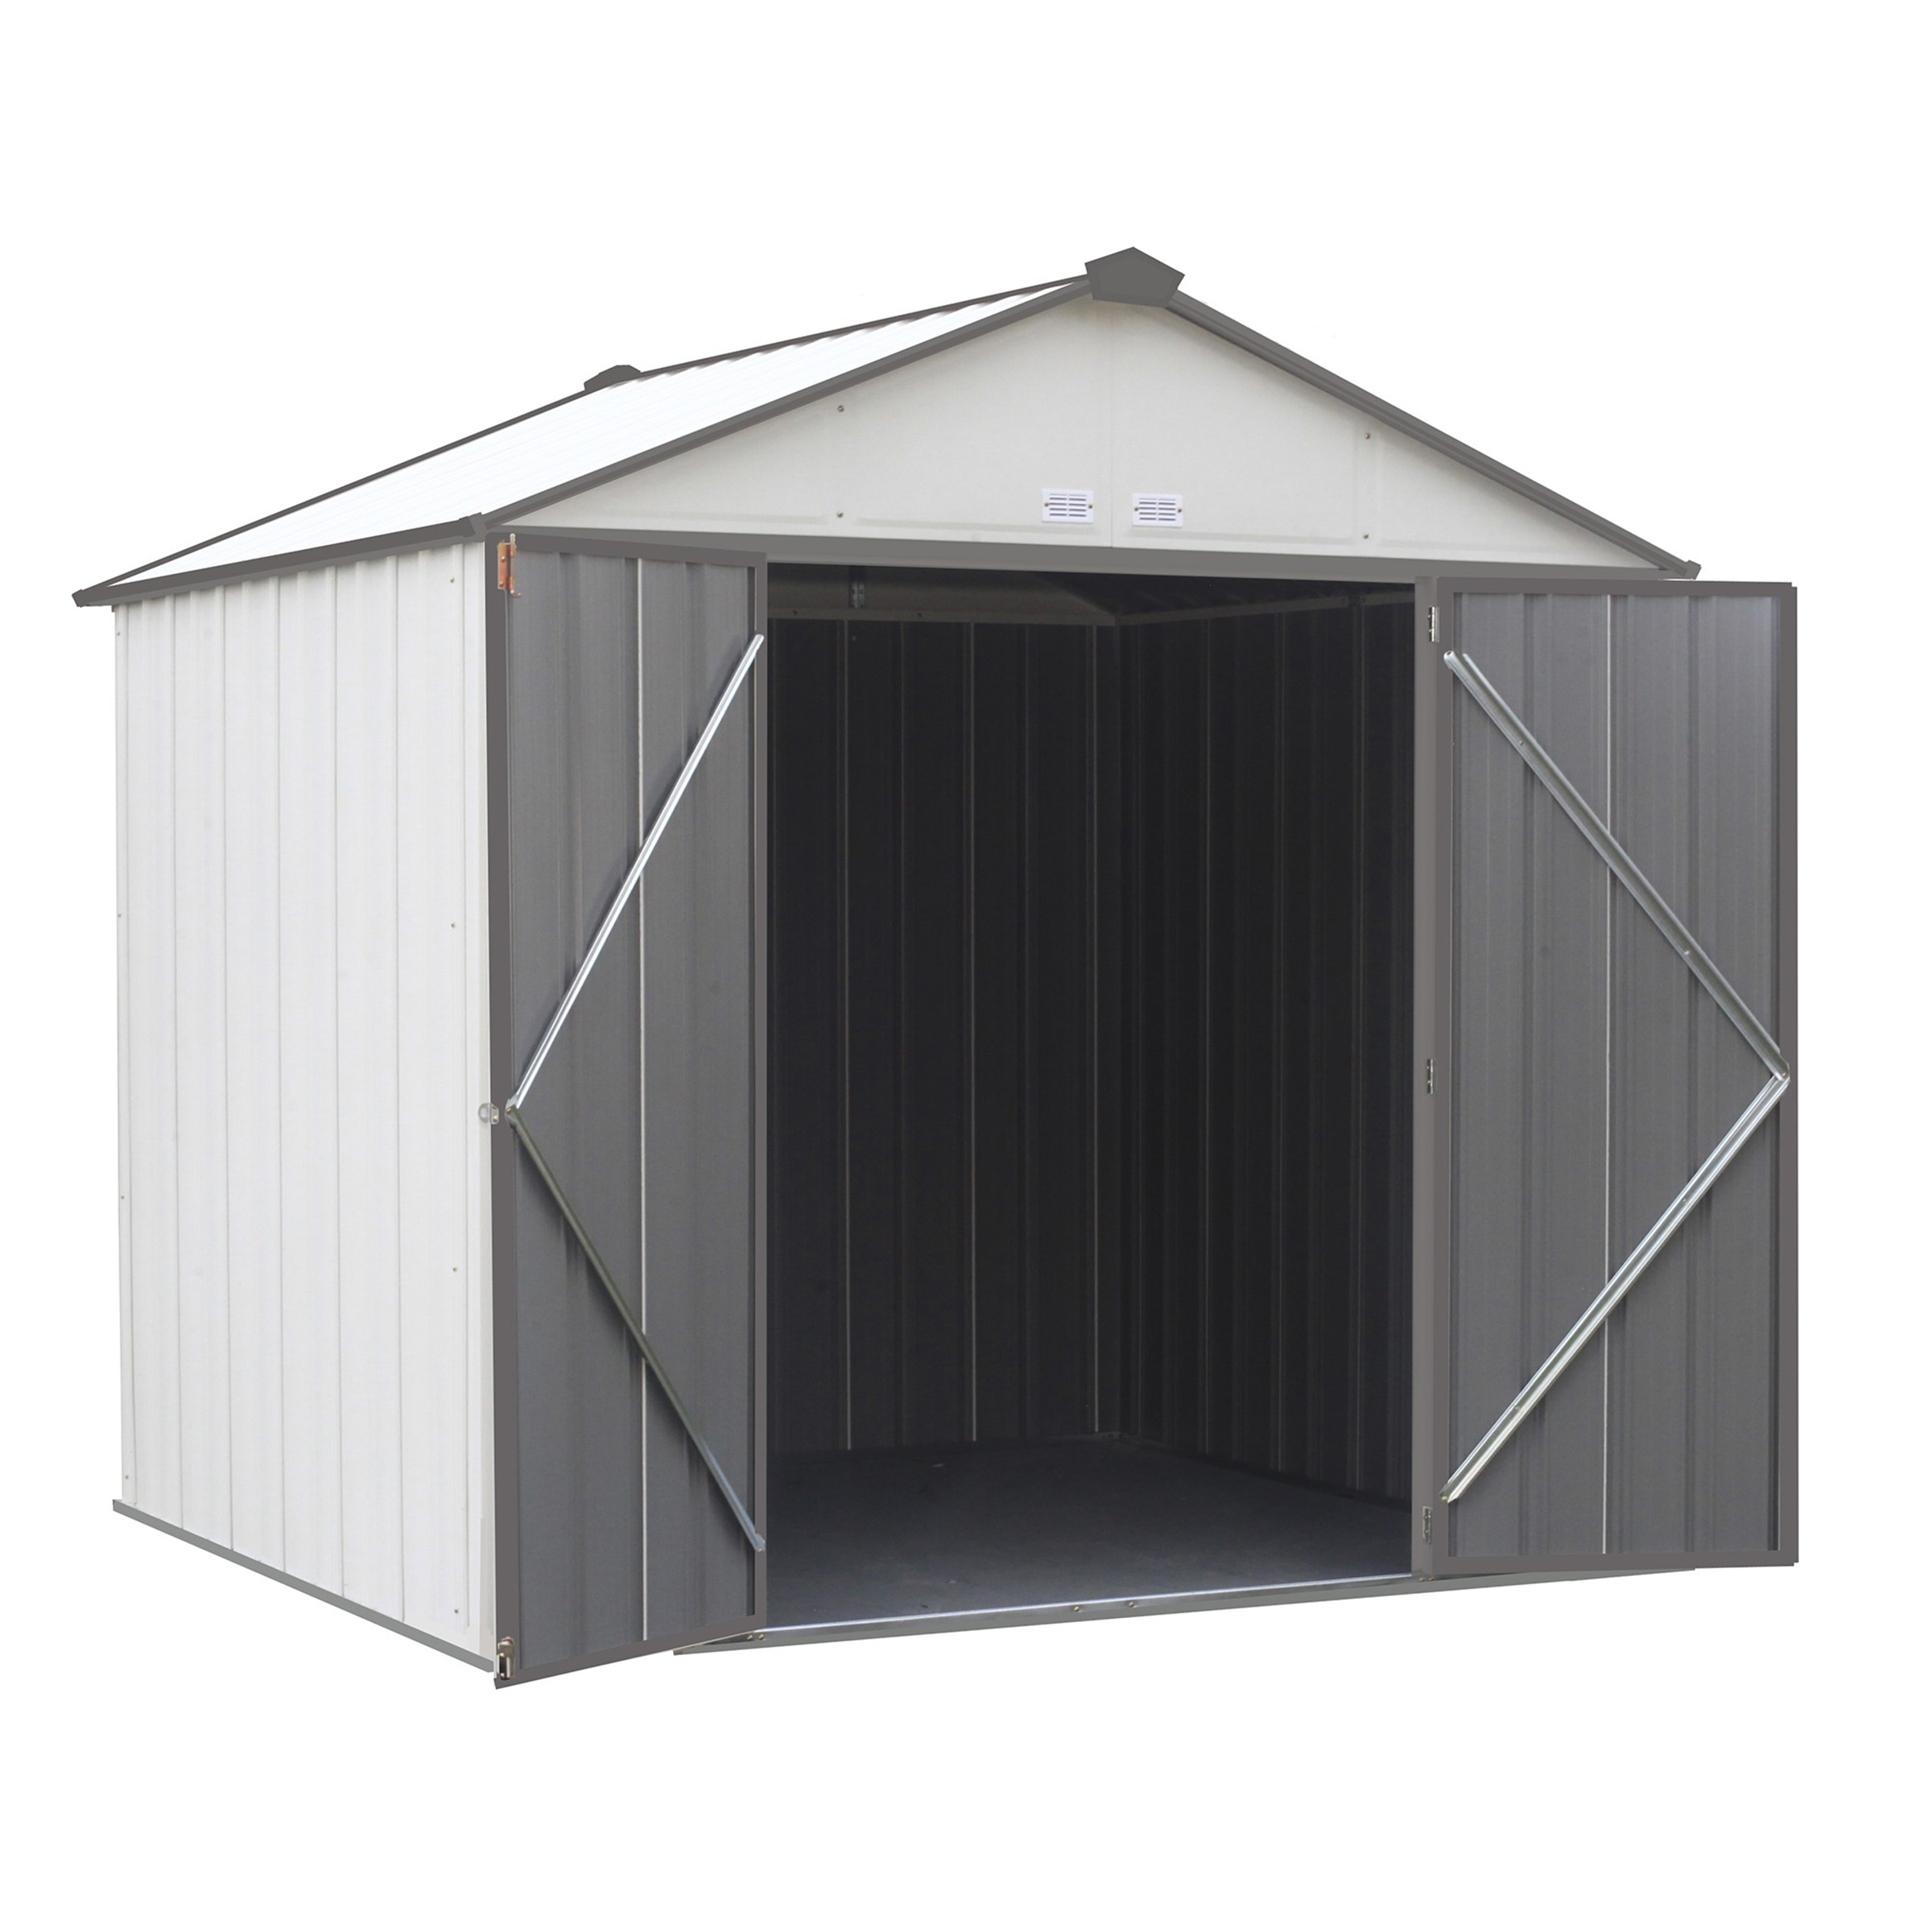 Ezee Shed , 8x7, High Gable, 72 In Walls, Cream & Charcoal